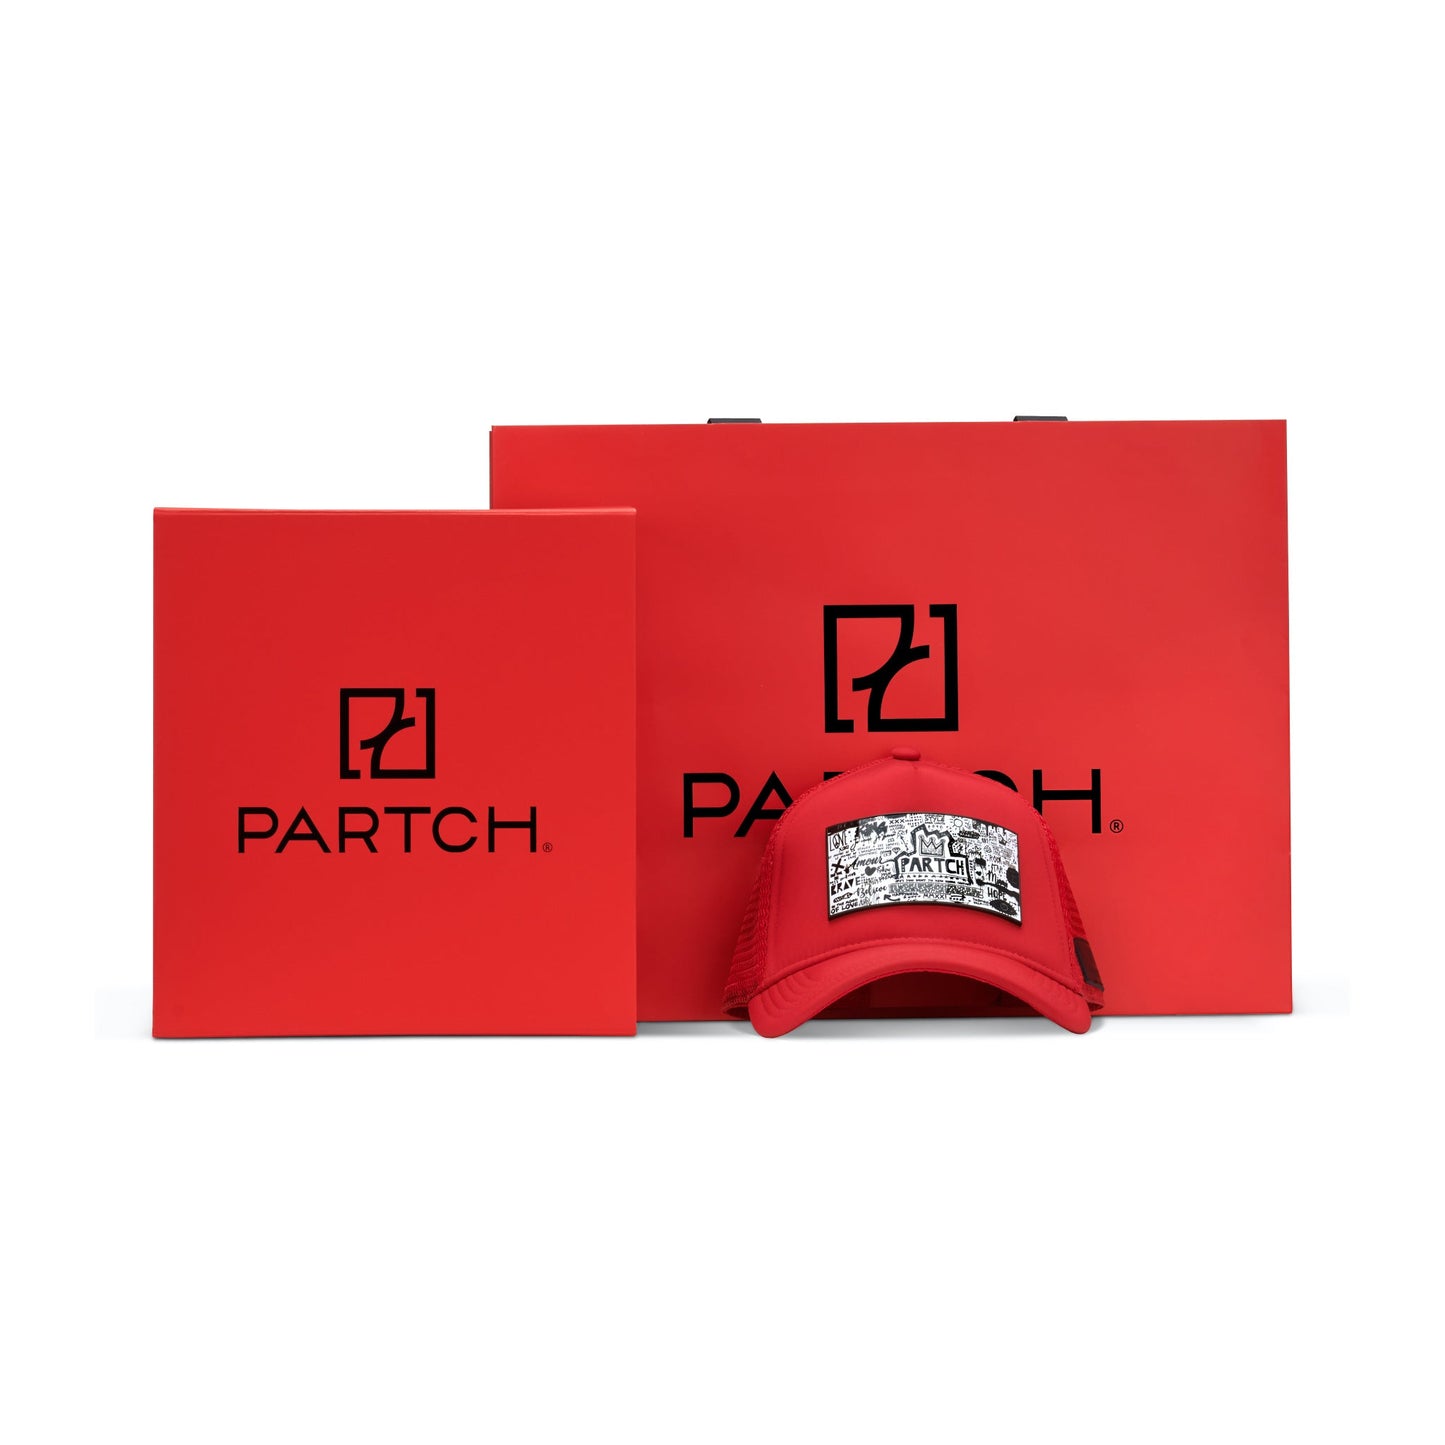 PARTCH Set Luxury Packaging. Box, Shopping Bag, Hats, Caps, Partch-Clip, red.